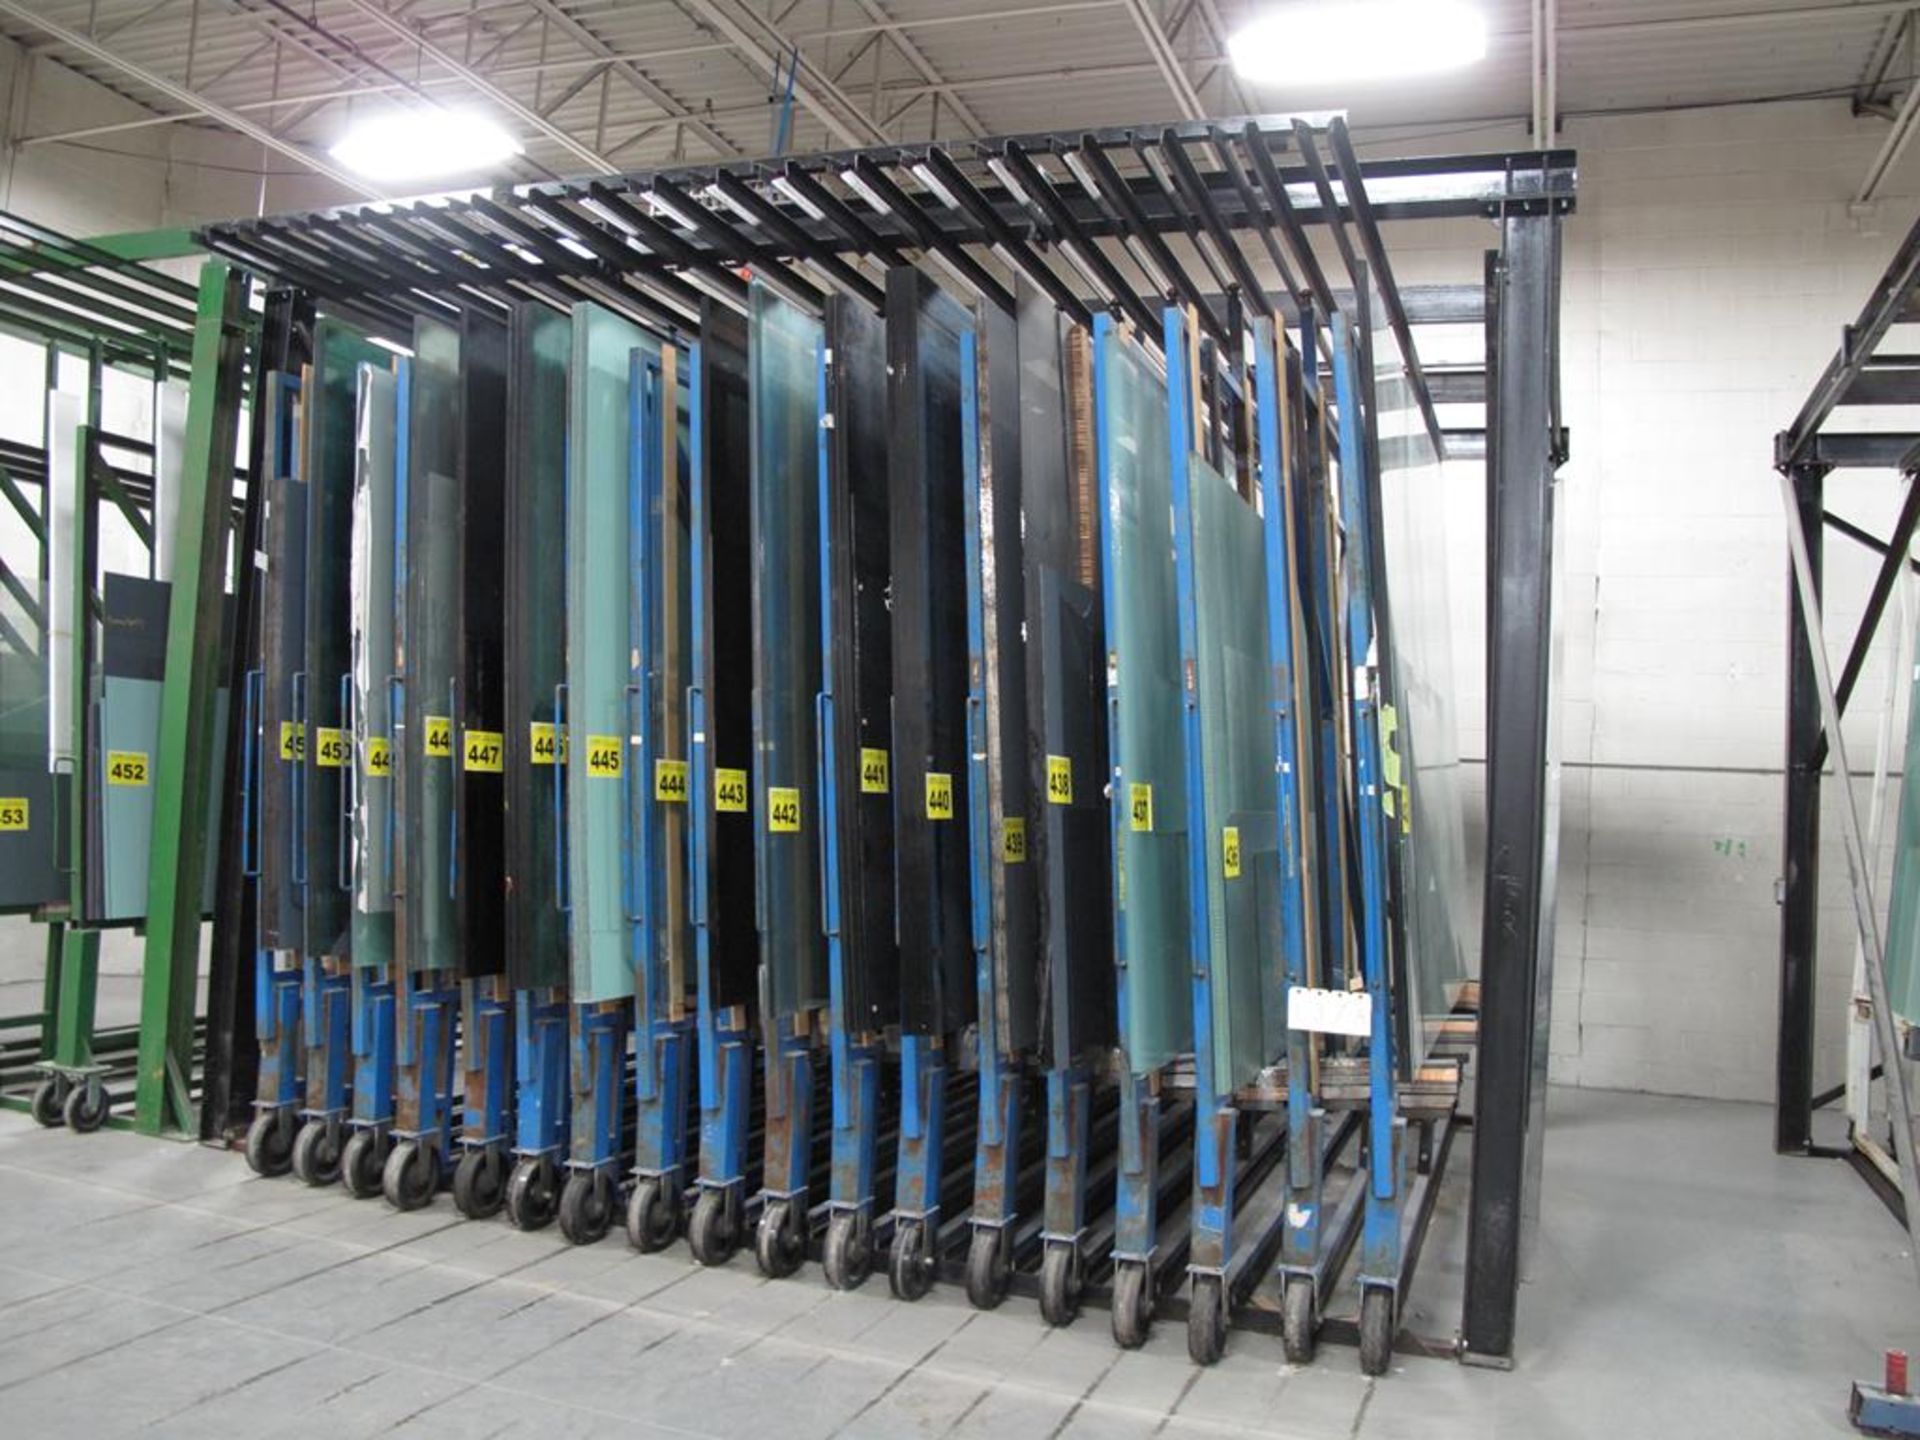 BROMER, 18 DRAWER, GLASS STORAGE SYSTEM, MAX GLASS SIZE 96" T X 140" LONG, MAX CAPACITY 4500 LBS.